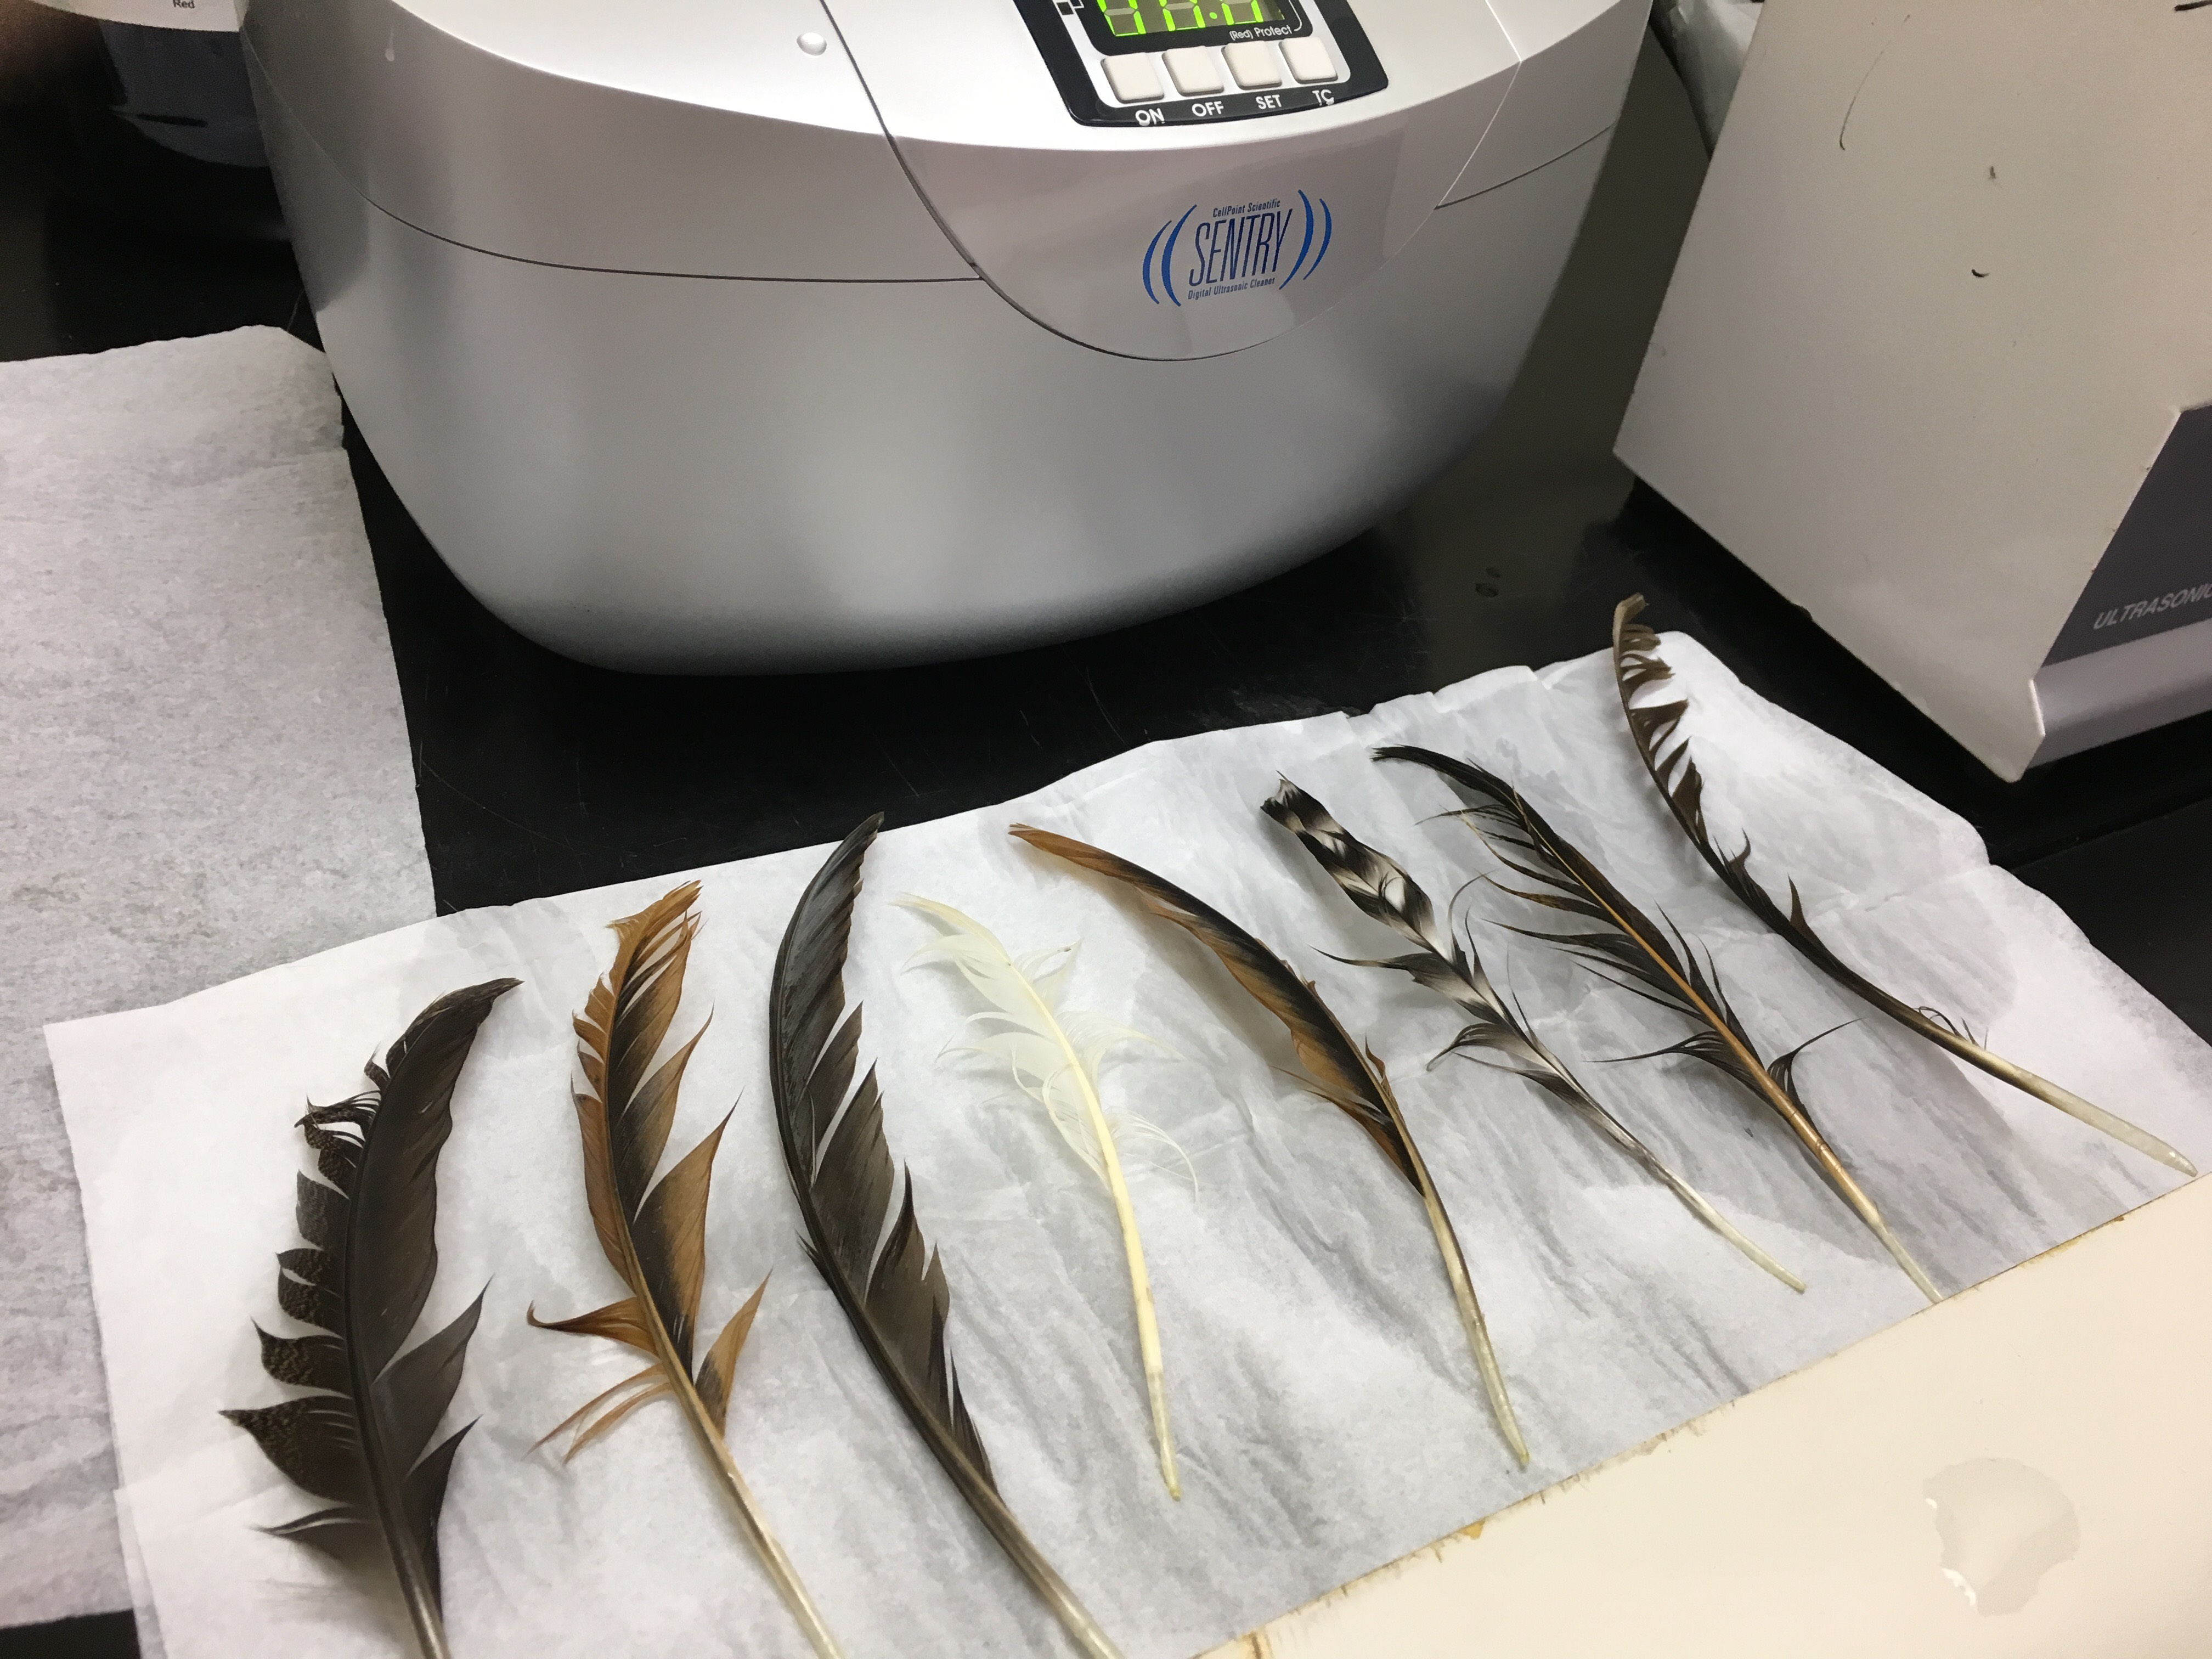 Removing Black Carbon from feathers Photo: Anna Lee